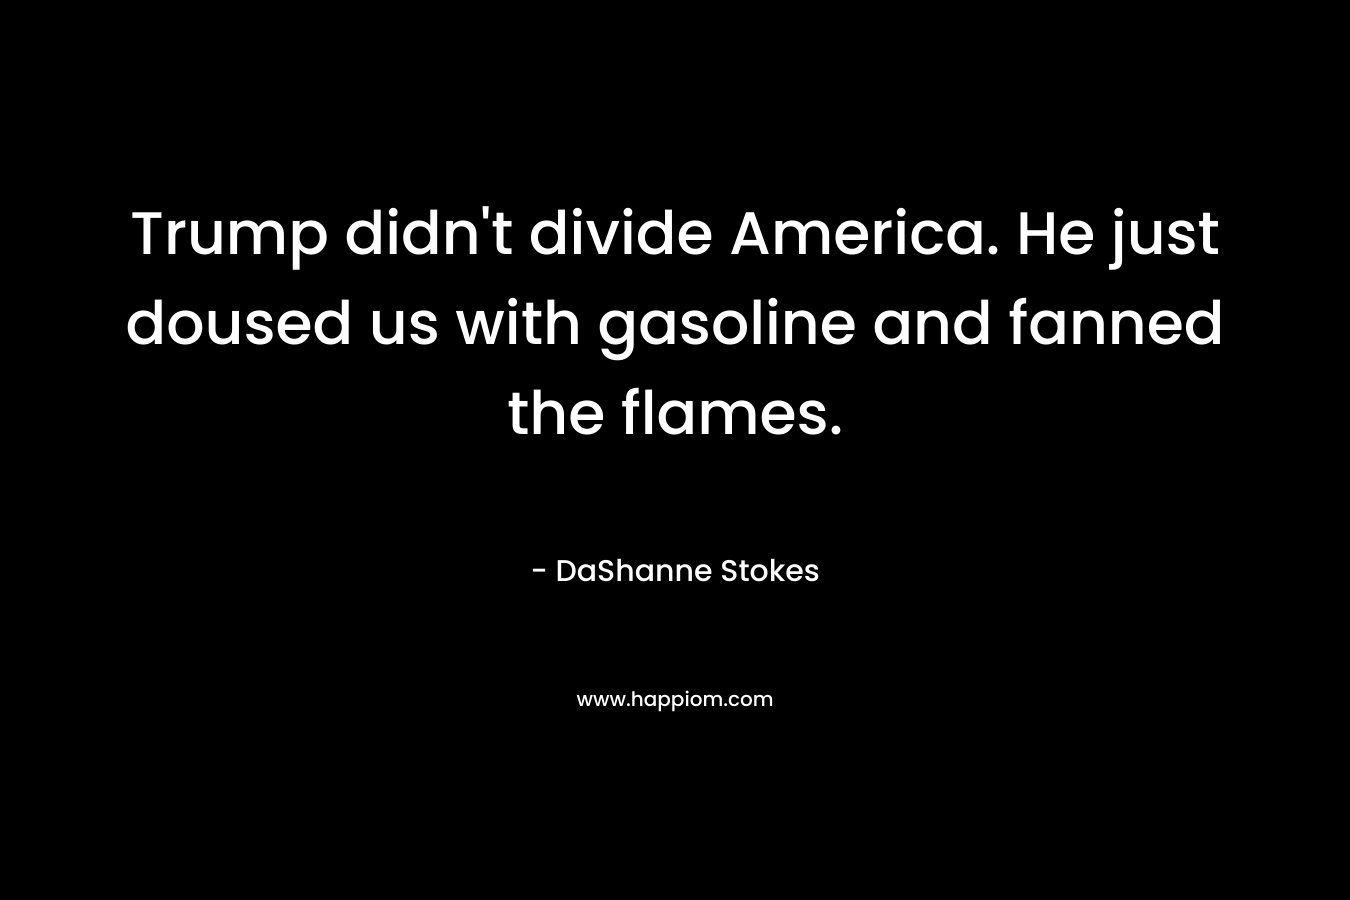 Trump didn't divide America. He just doused us with gasoline and fanned the flames.